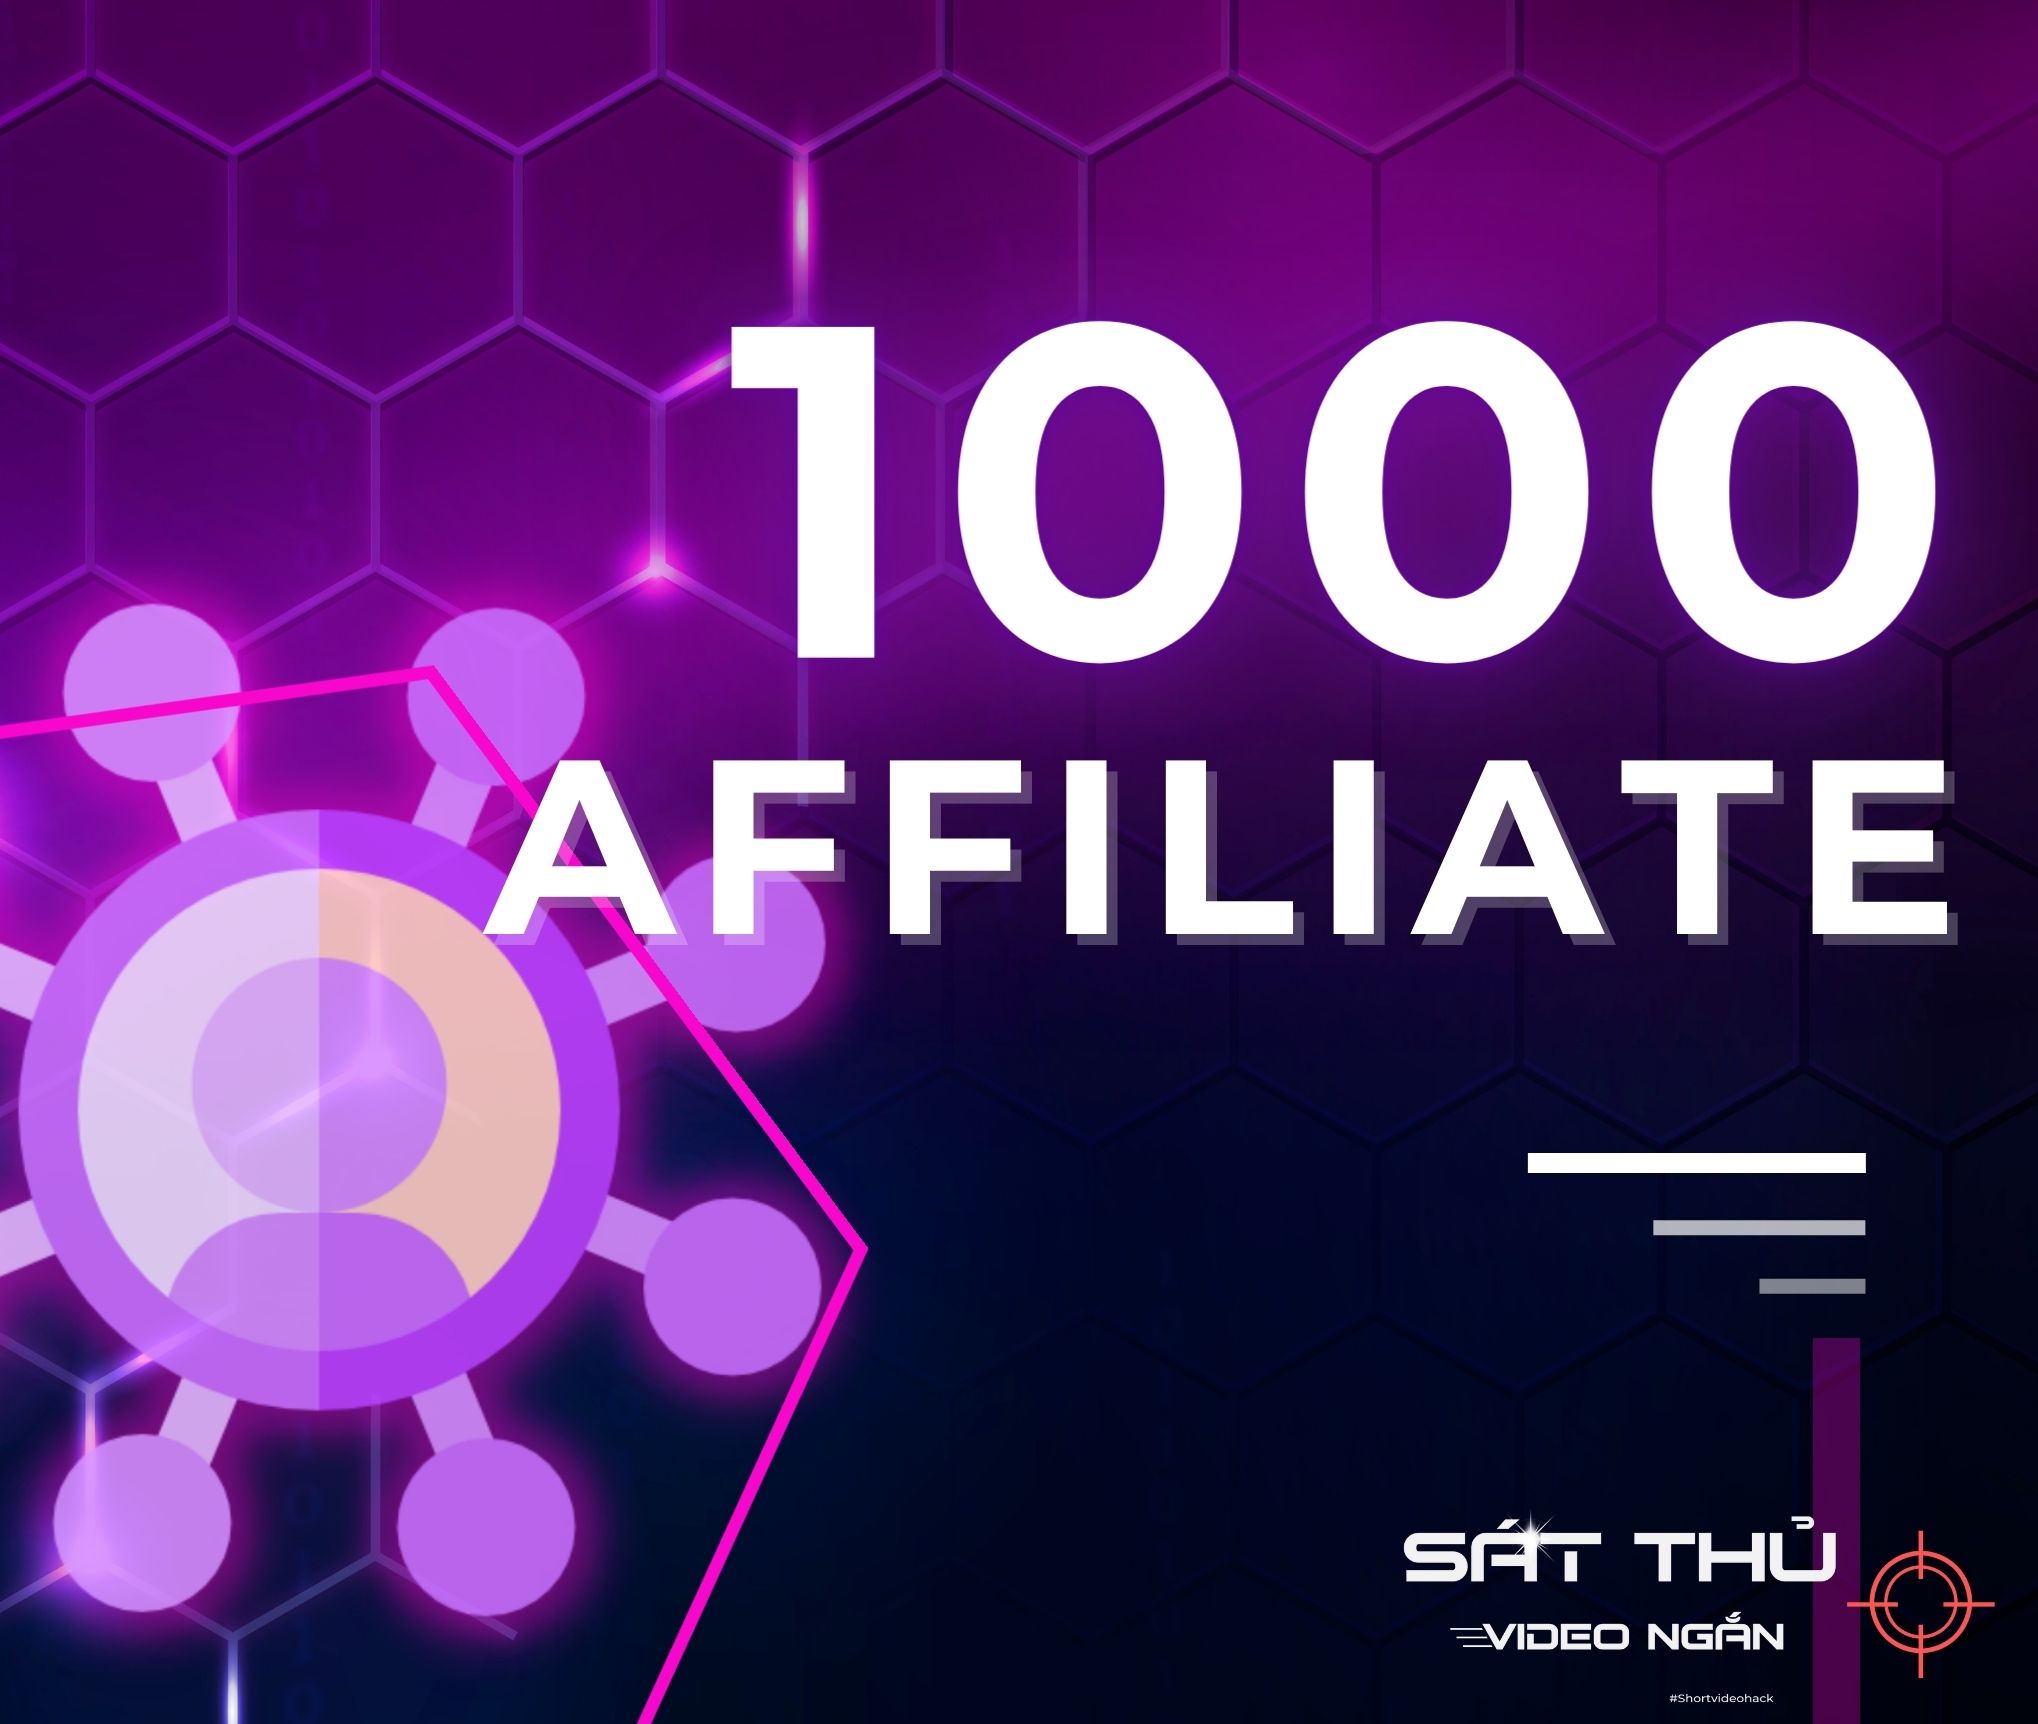 Xây dựng Hệ thống 1000 Affiliate